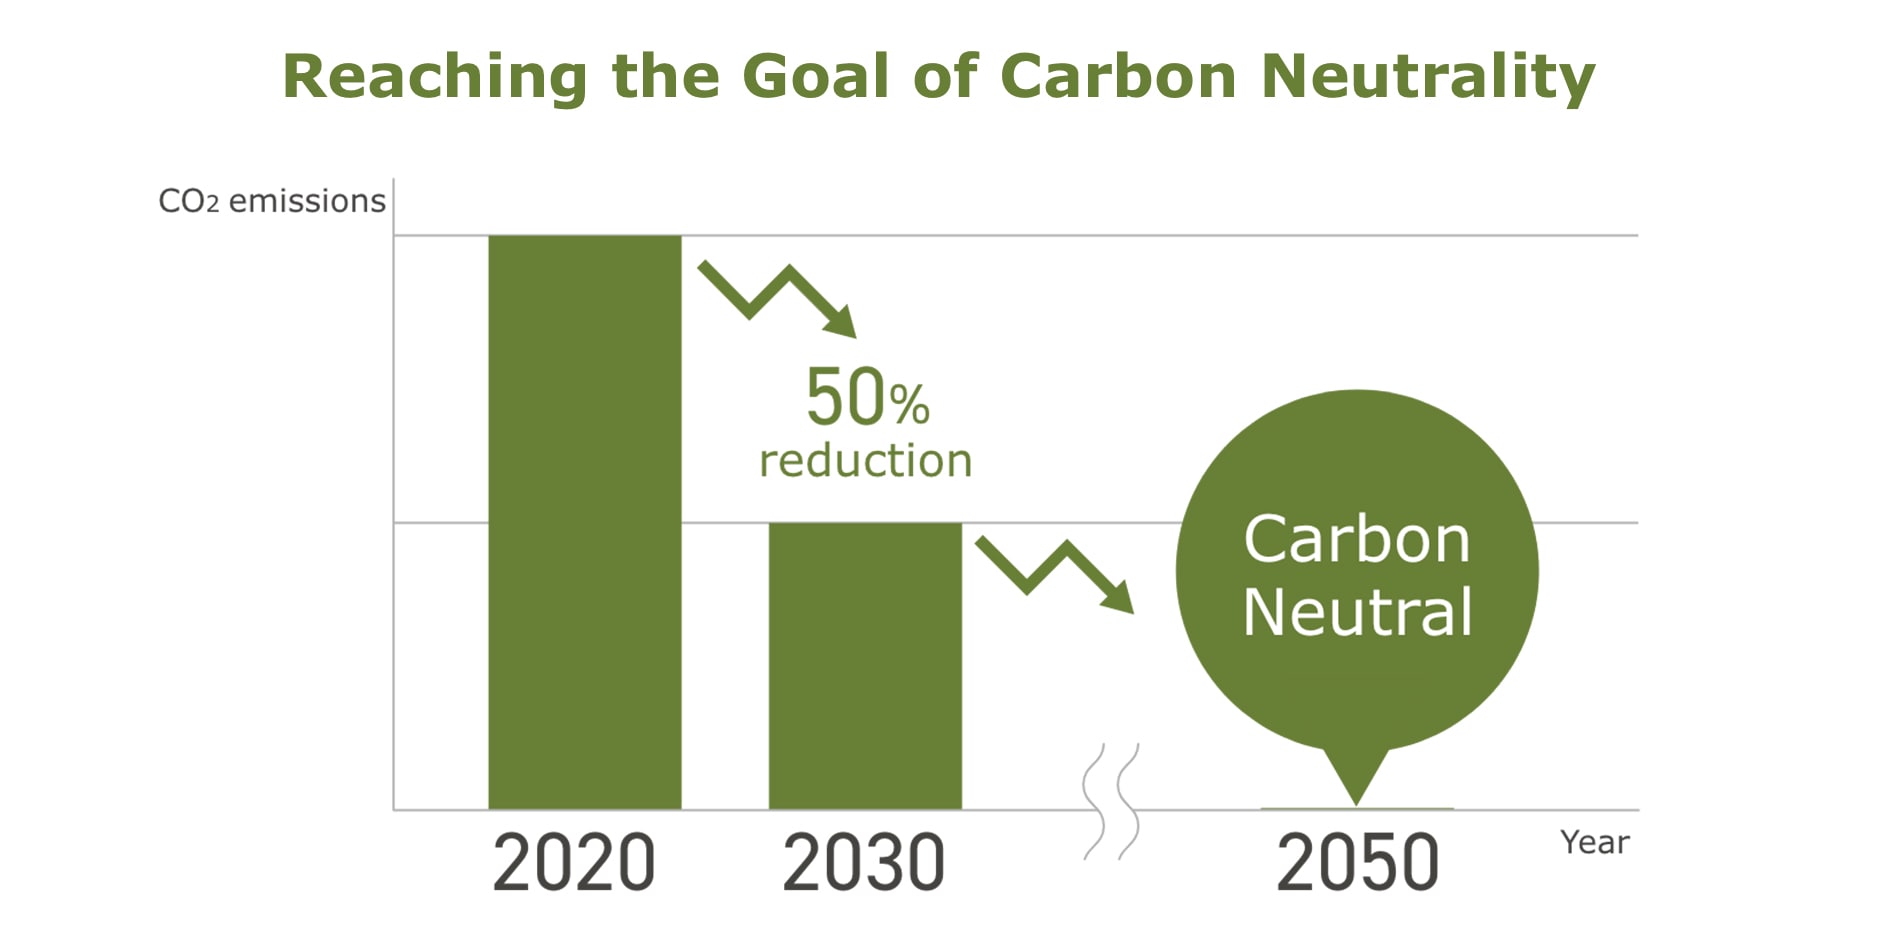 Reaching the Goal of Carbon Neutrality